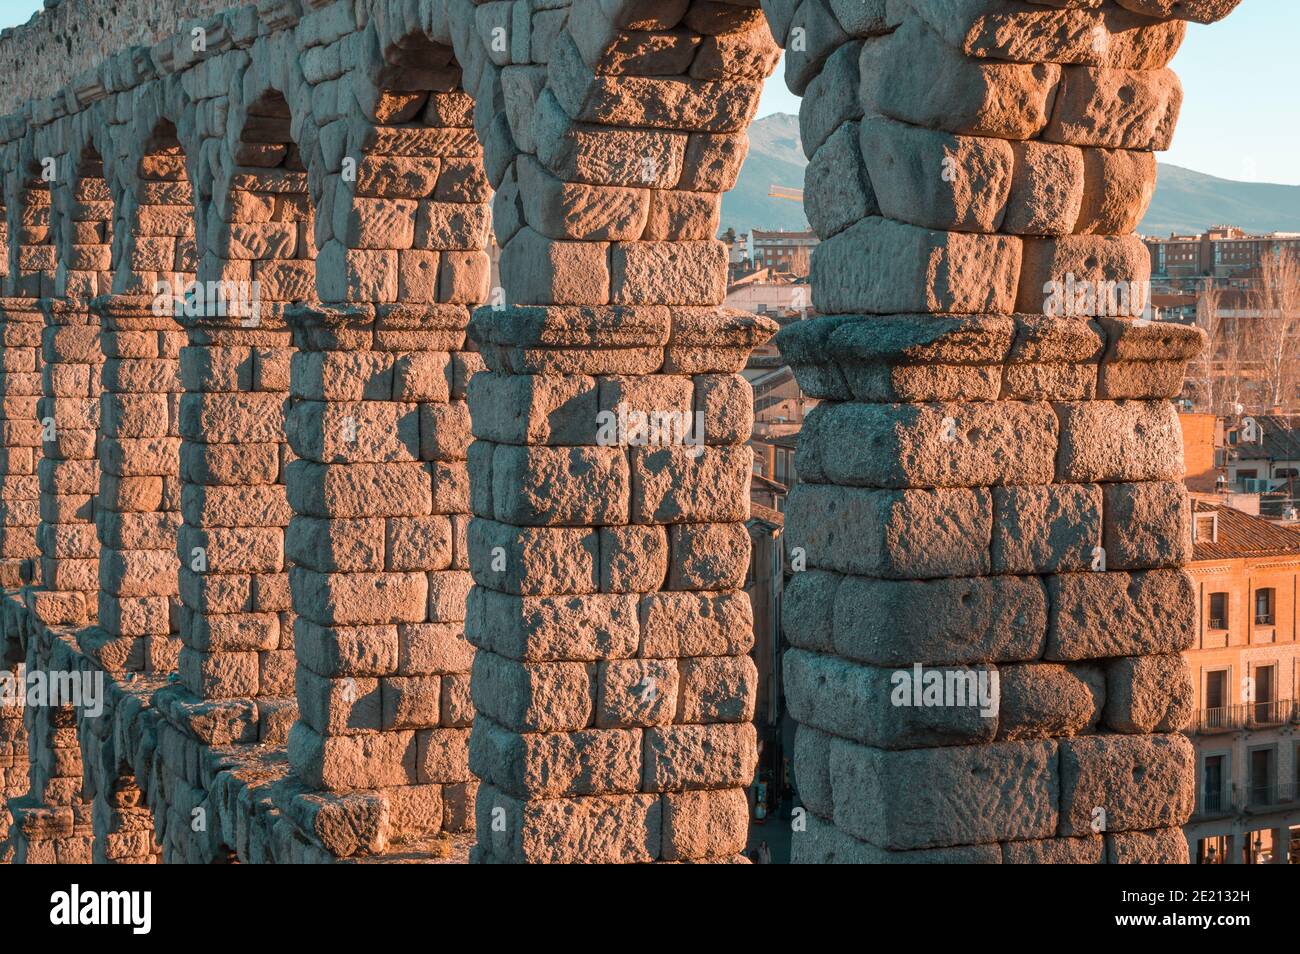 SEGOVIA, SPAIN - Feb 23, 2020: Close-up of the upper arches of the Segovia Aqueduct bathed in the light of a winter afternoon sunset Stock Photo